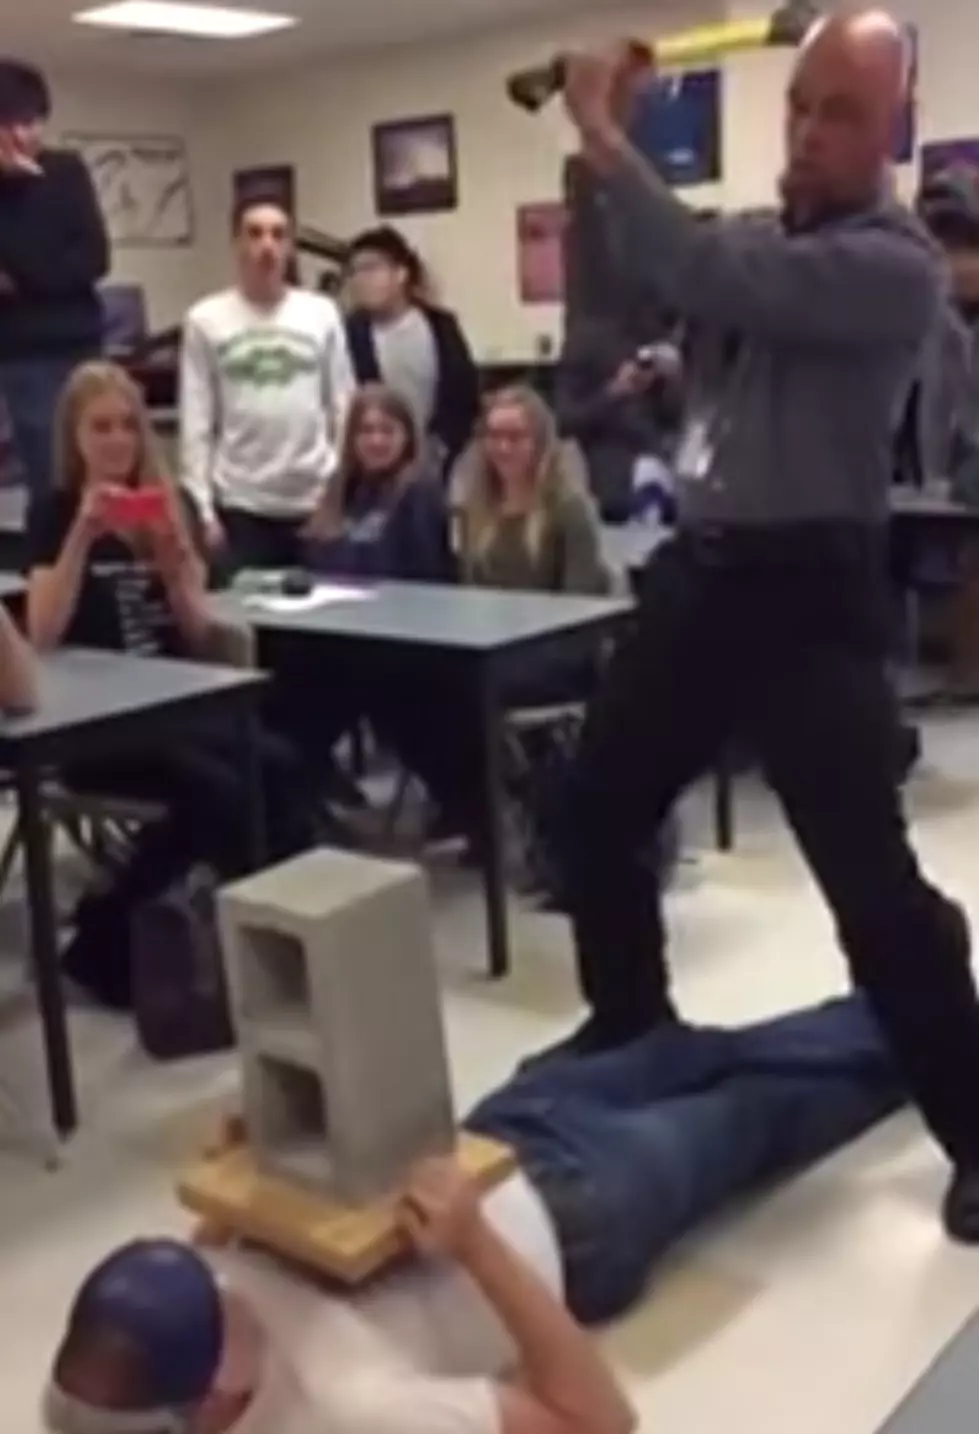 Classroom Science Experiment Goes Really Wrong [VIDEO]